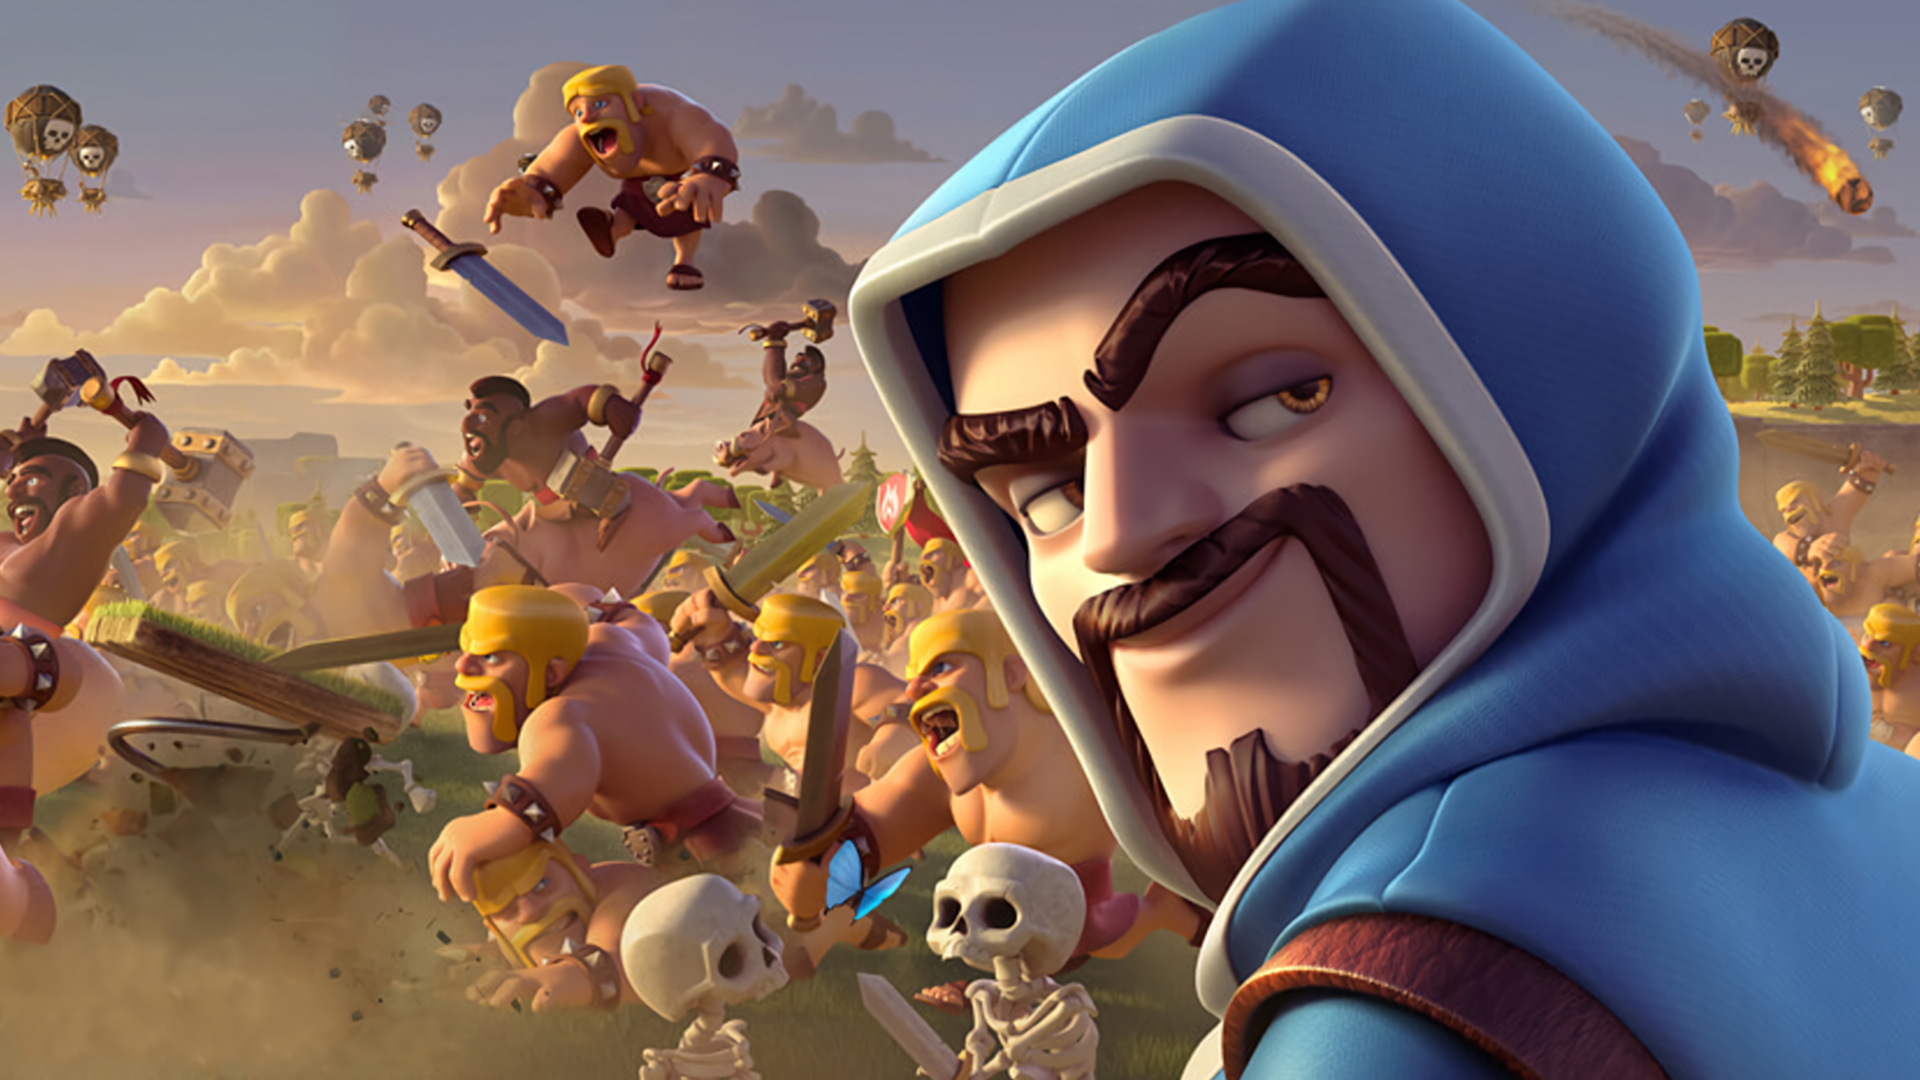 Video Game Clash Of Clans Wallpapers.